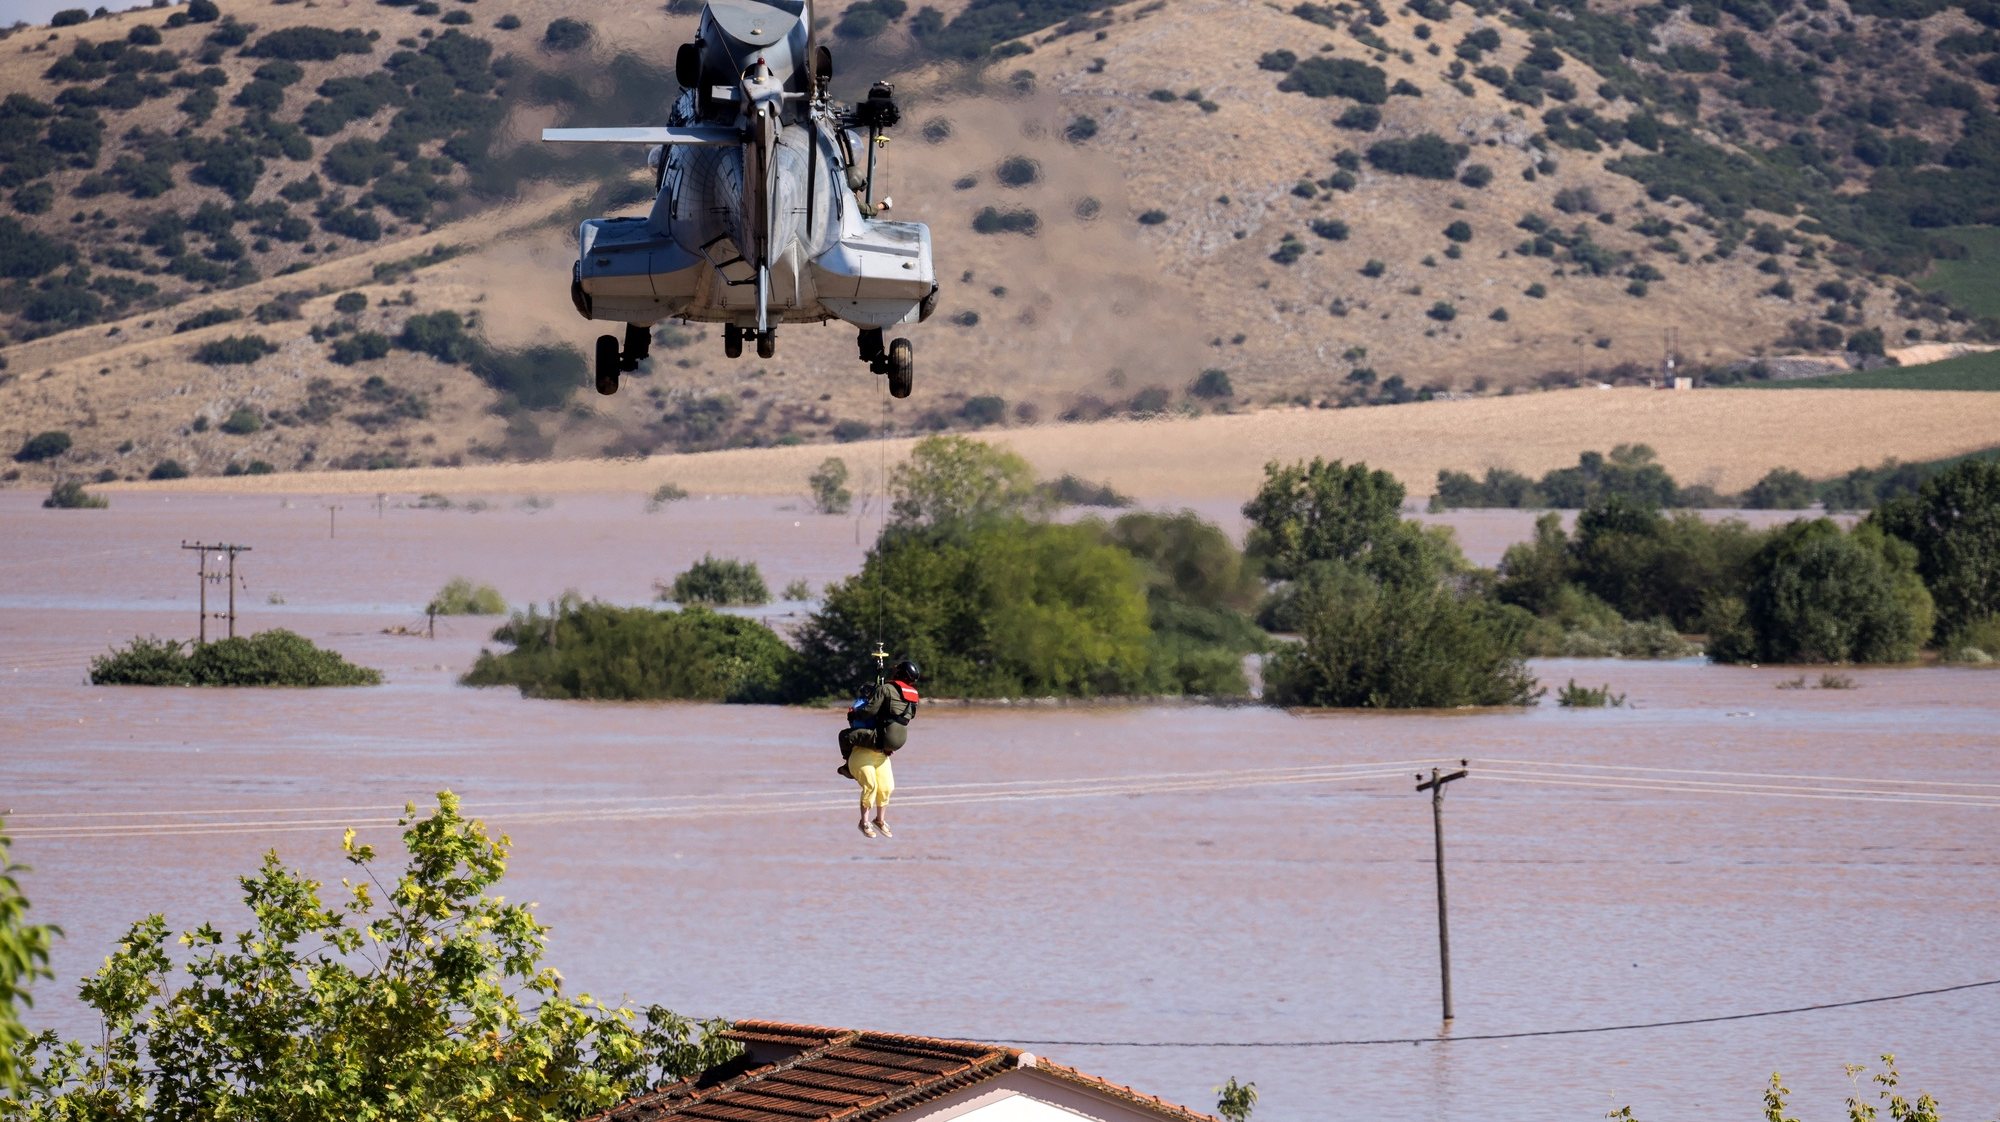 epa10848625 A helicopter and its crew work on rescuing people stranded in a flooded area after Storm Daniel, in Piniada village, near Trikala, Thessaly, Greece, 08 September 2023. At least six people died and another six still missing in a flooded central Greek region as unprecedented bad weather conditions struck the country.  EPA/ACHILLEAS CHIRAS